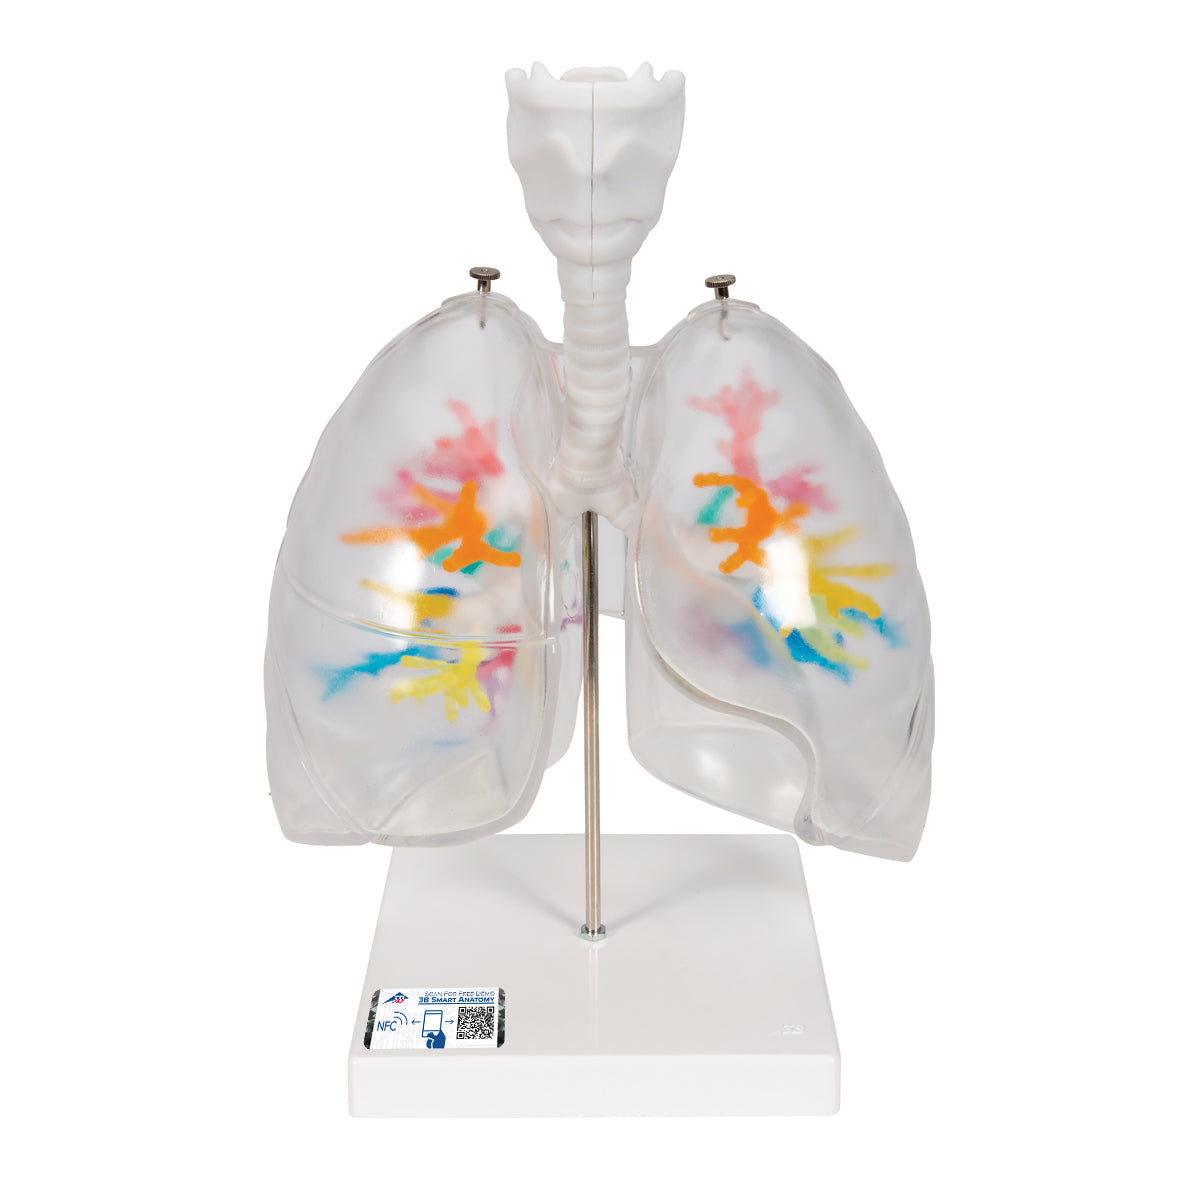 CT bronchi with larynx 3D model via tomographic data with lungs